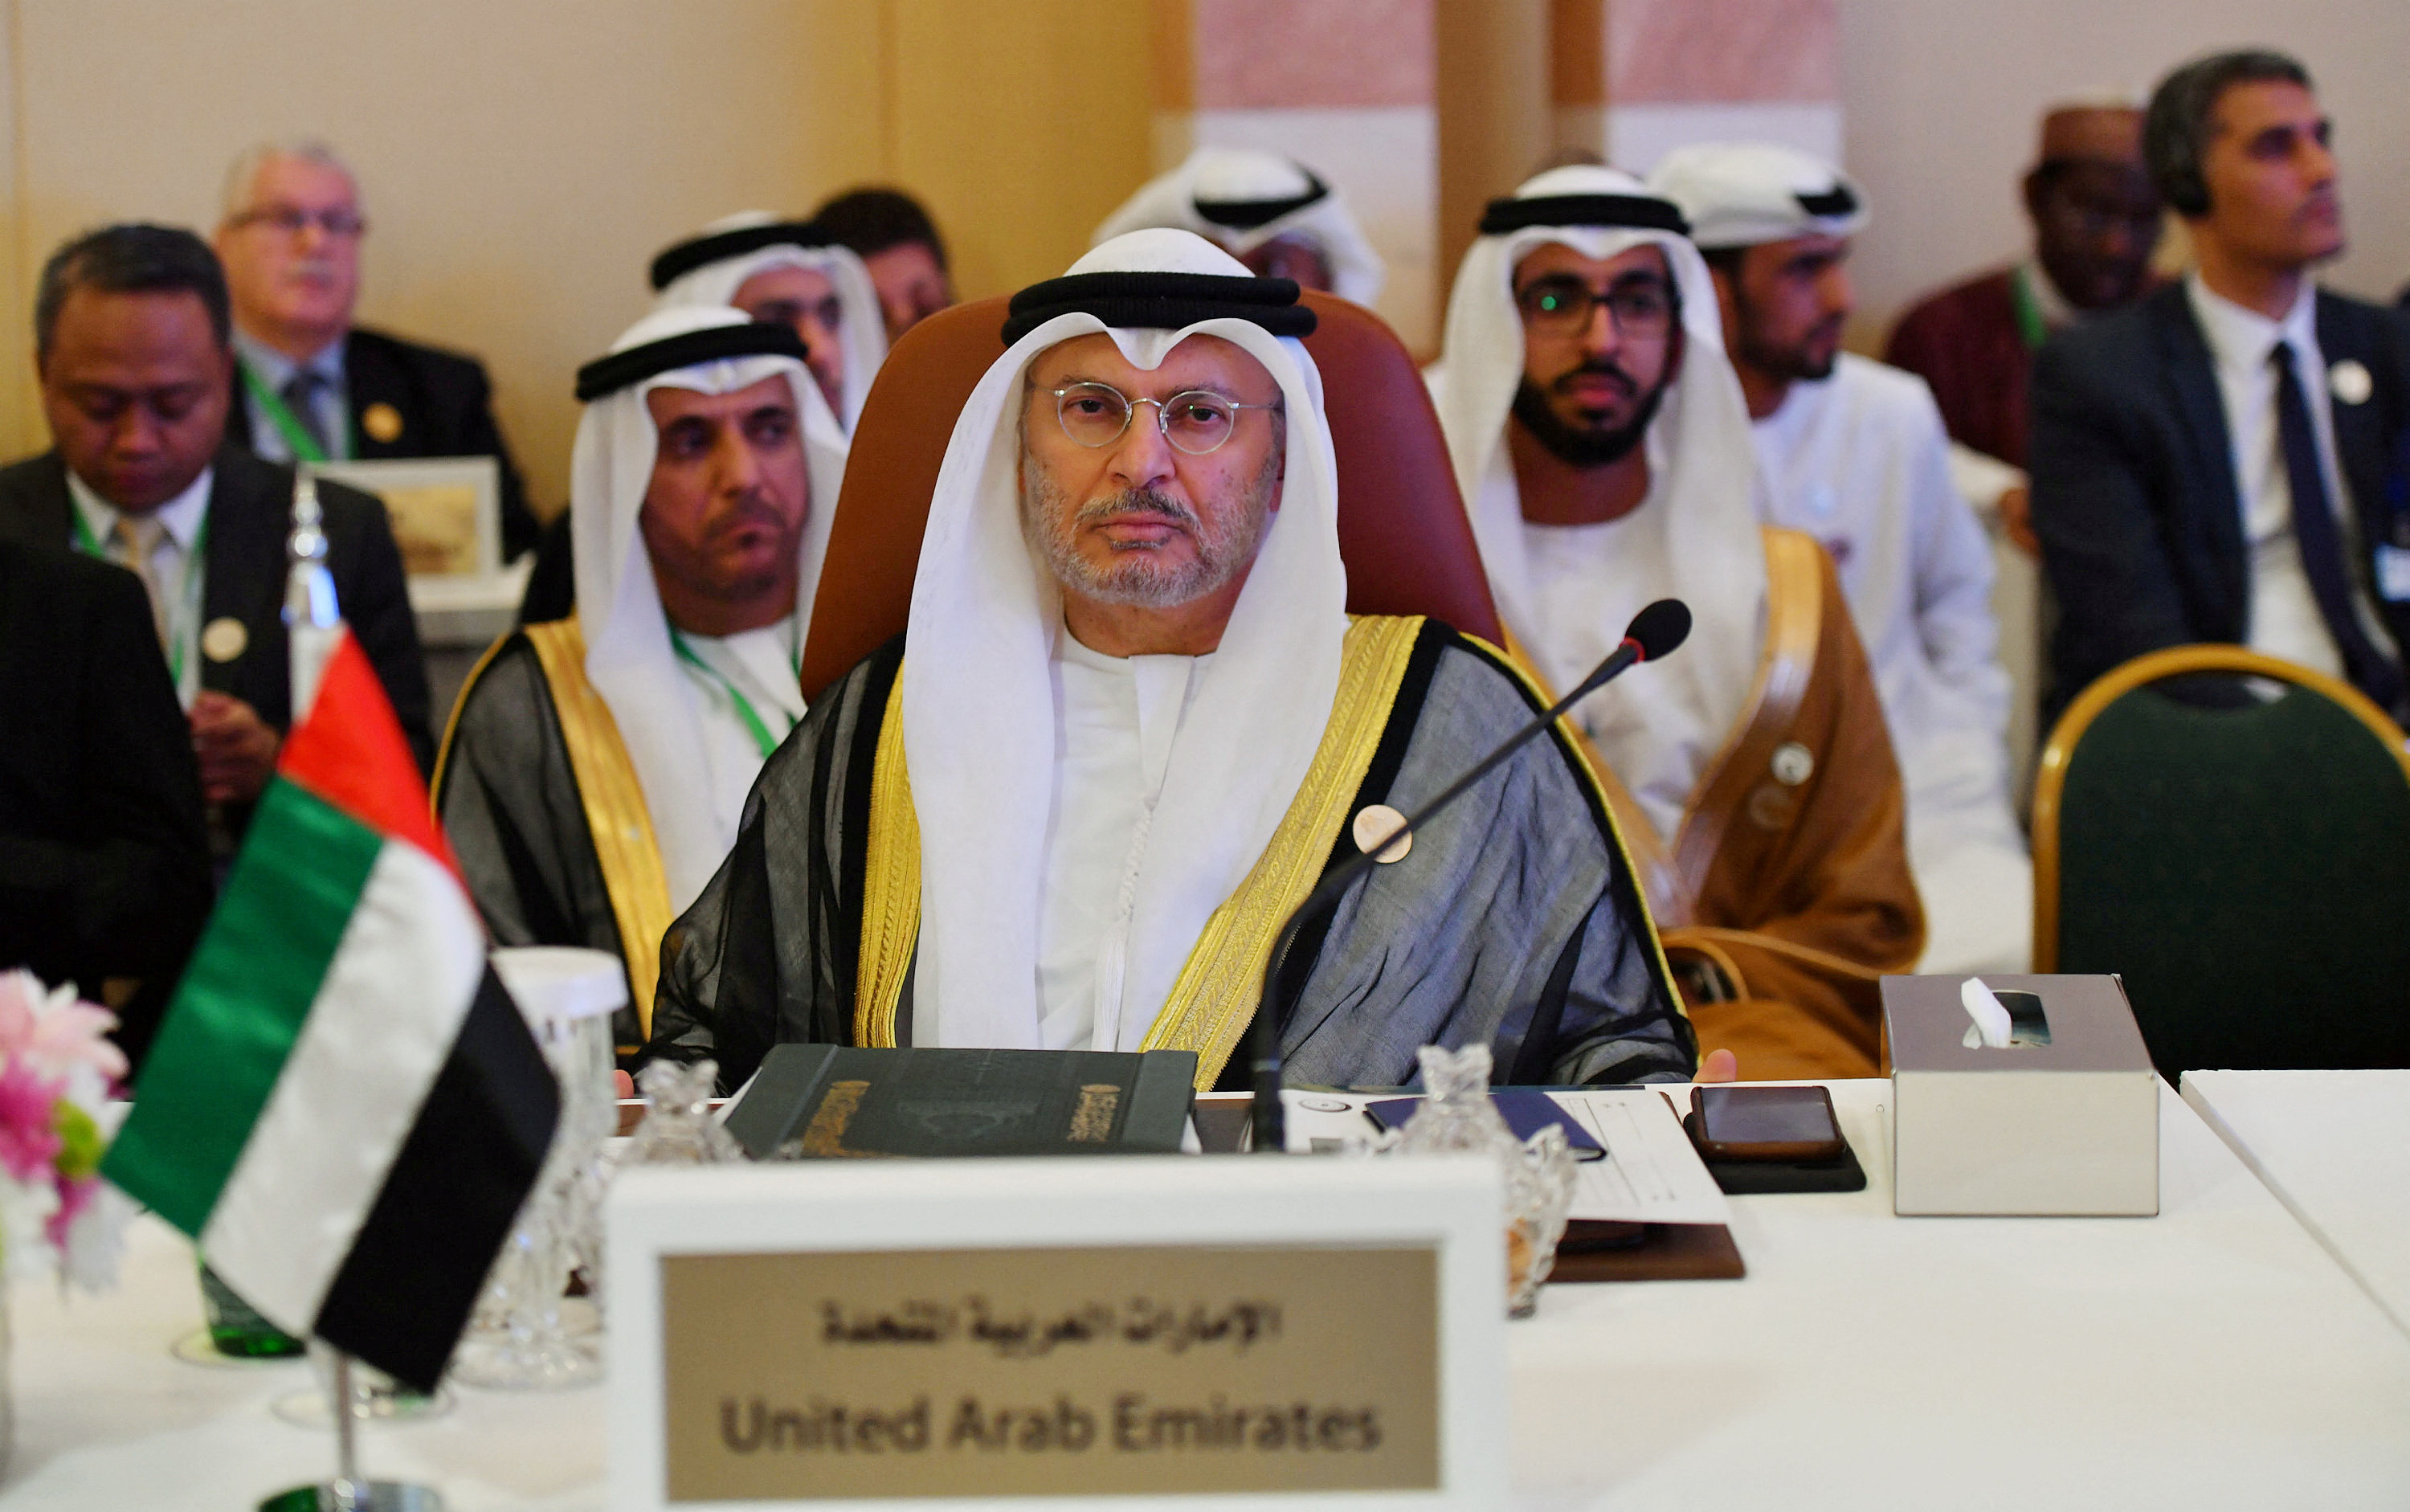 UAE Minister of State for Foreign Affairs Anwar Gargash is seen during preparatory meeting for the GCC, Arab and Islamic summits in Jeddah